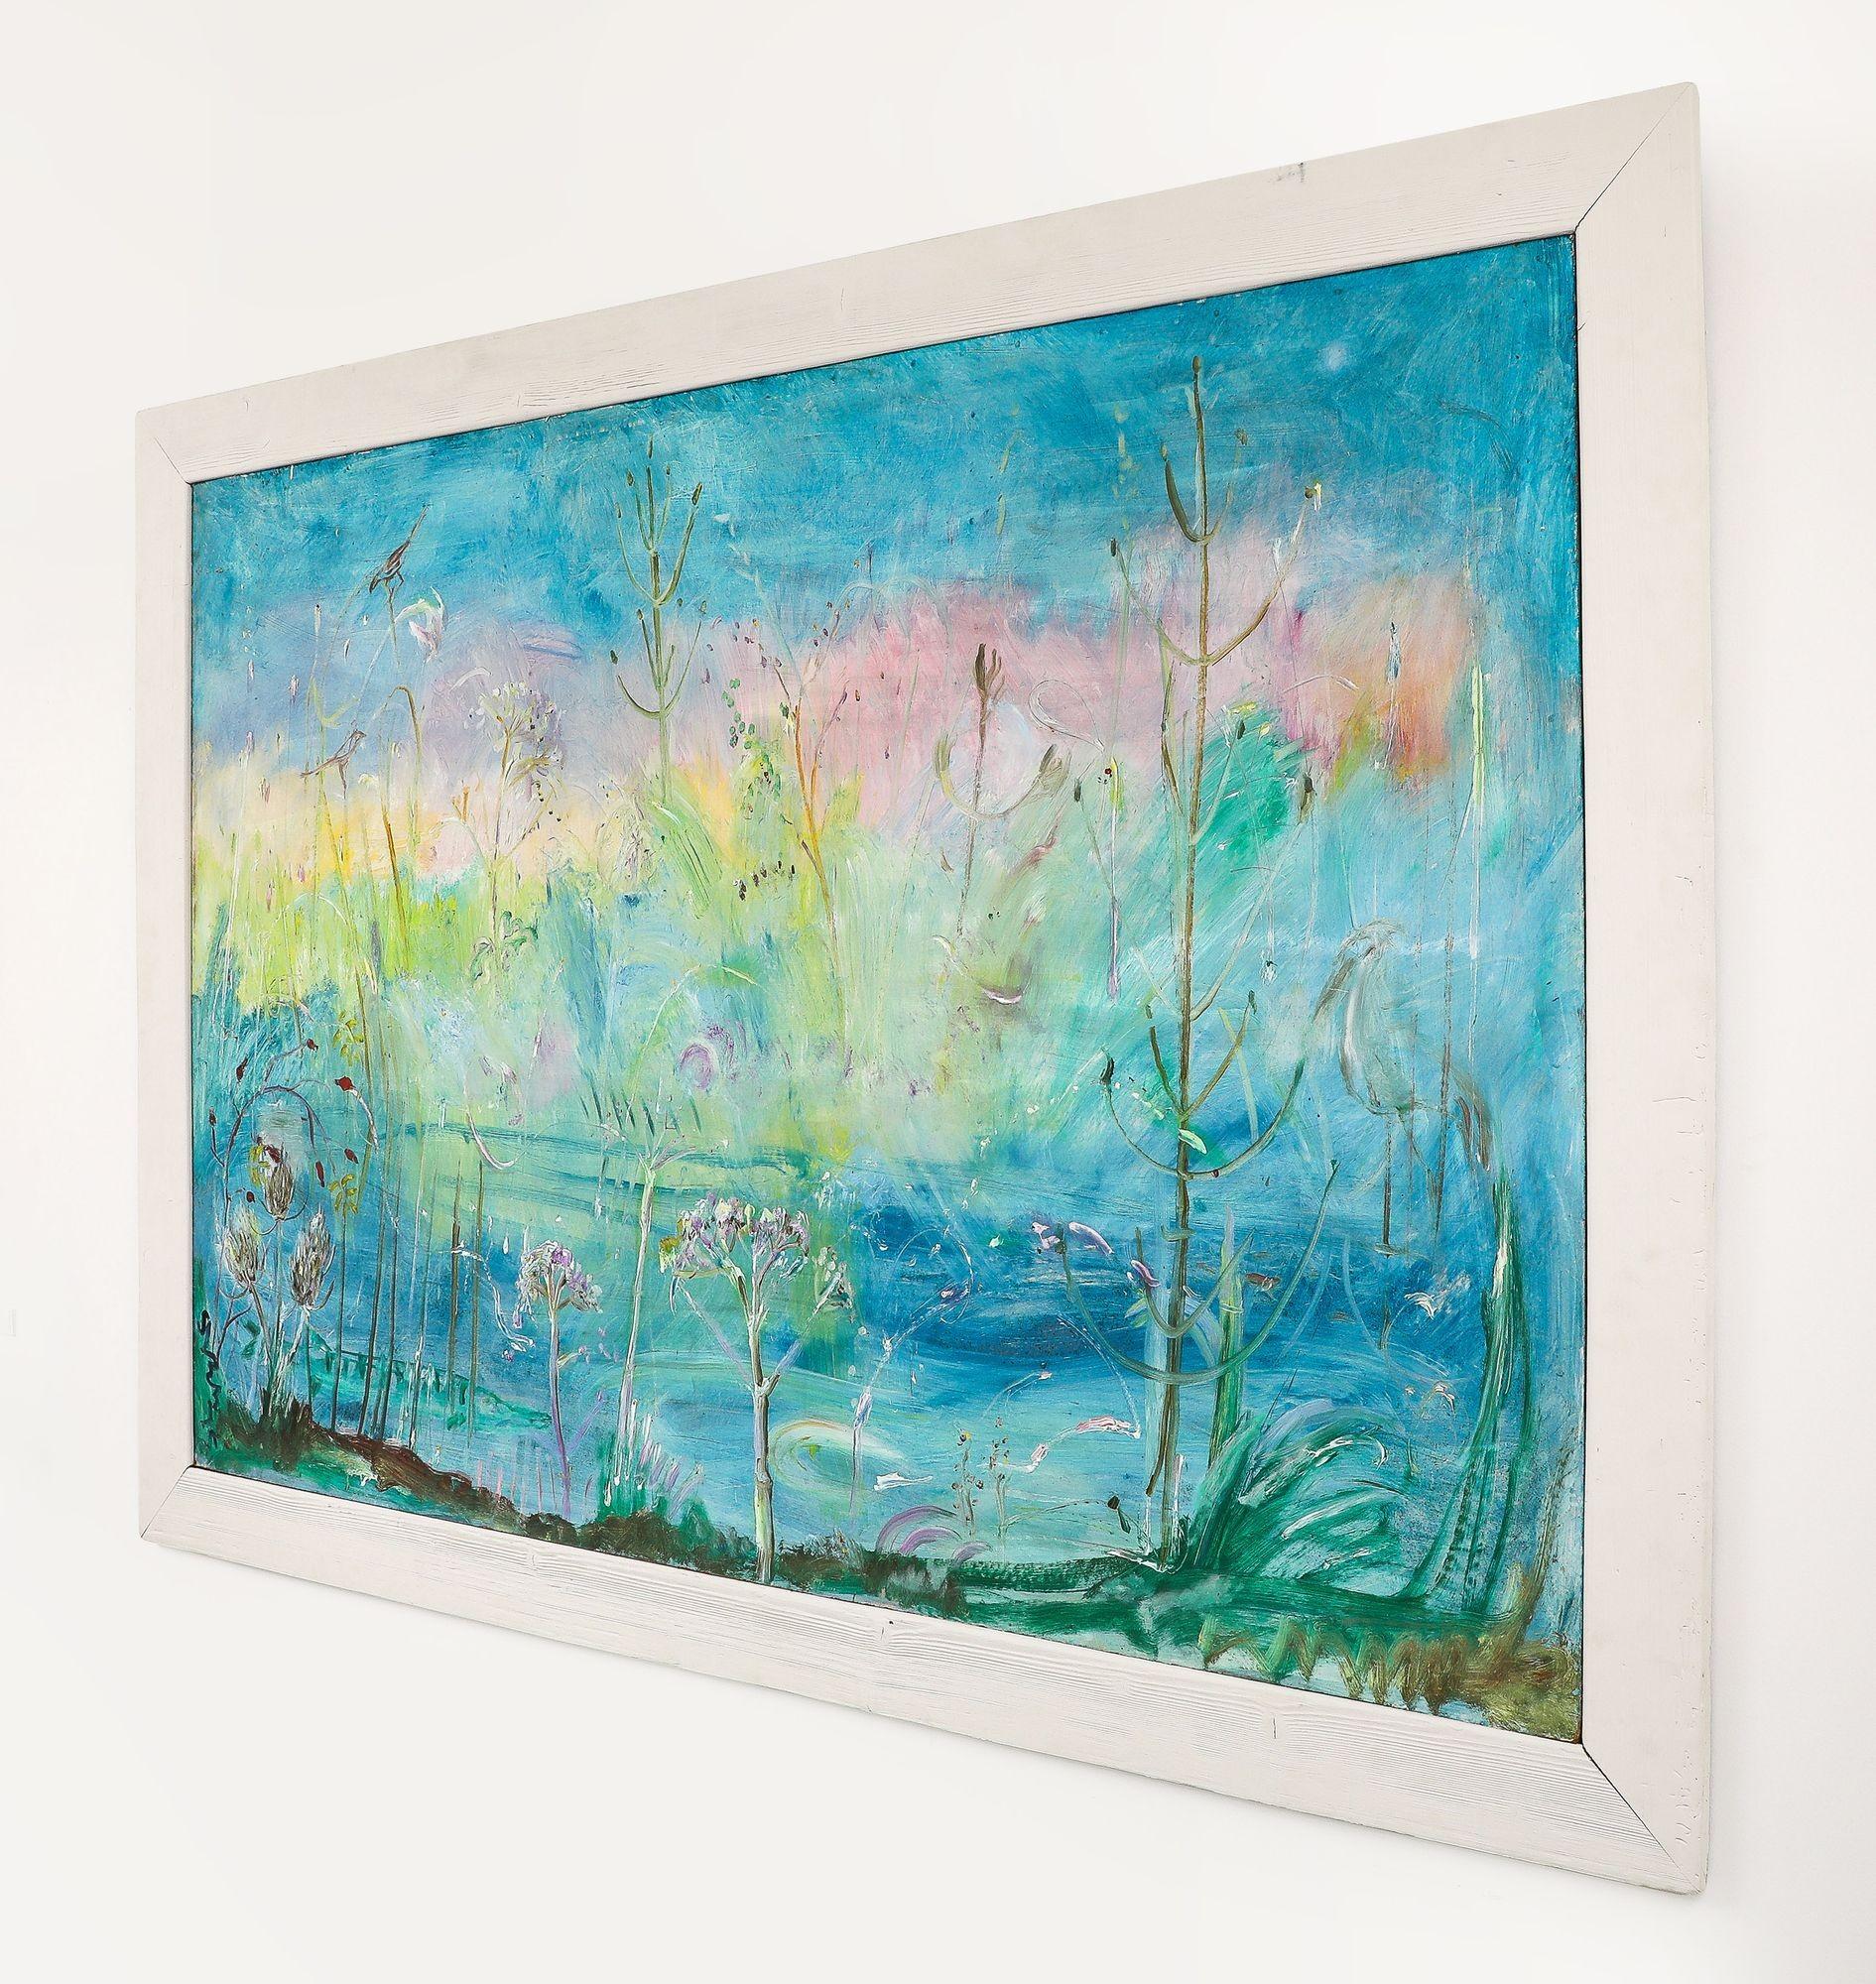 In Sven Berlin's large contemporary oil on canvas, the essence of impressionist mastery unfolds upon the viewer. Captured on a grand scale, a water landscape comes to life with vibrant hues and dynamic brushstrokes. Berlin's keen eye for detail